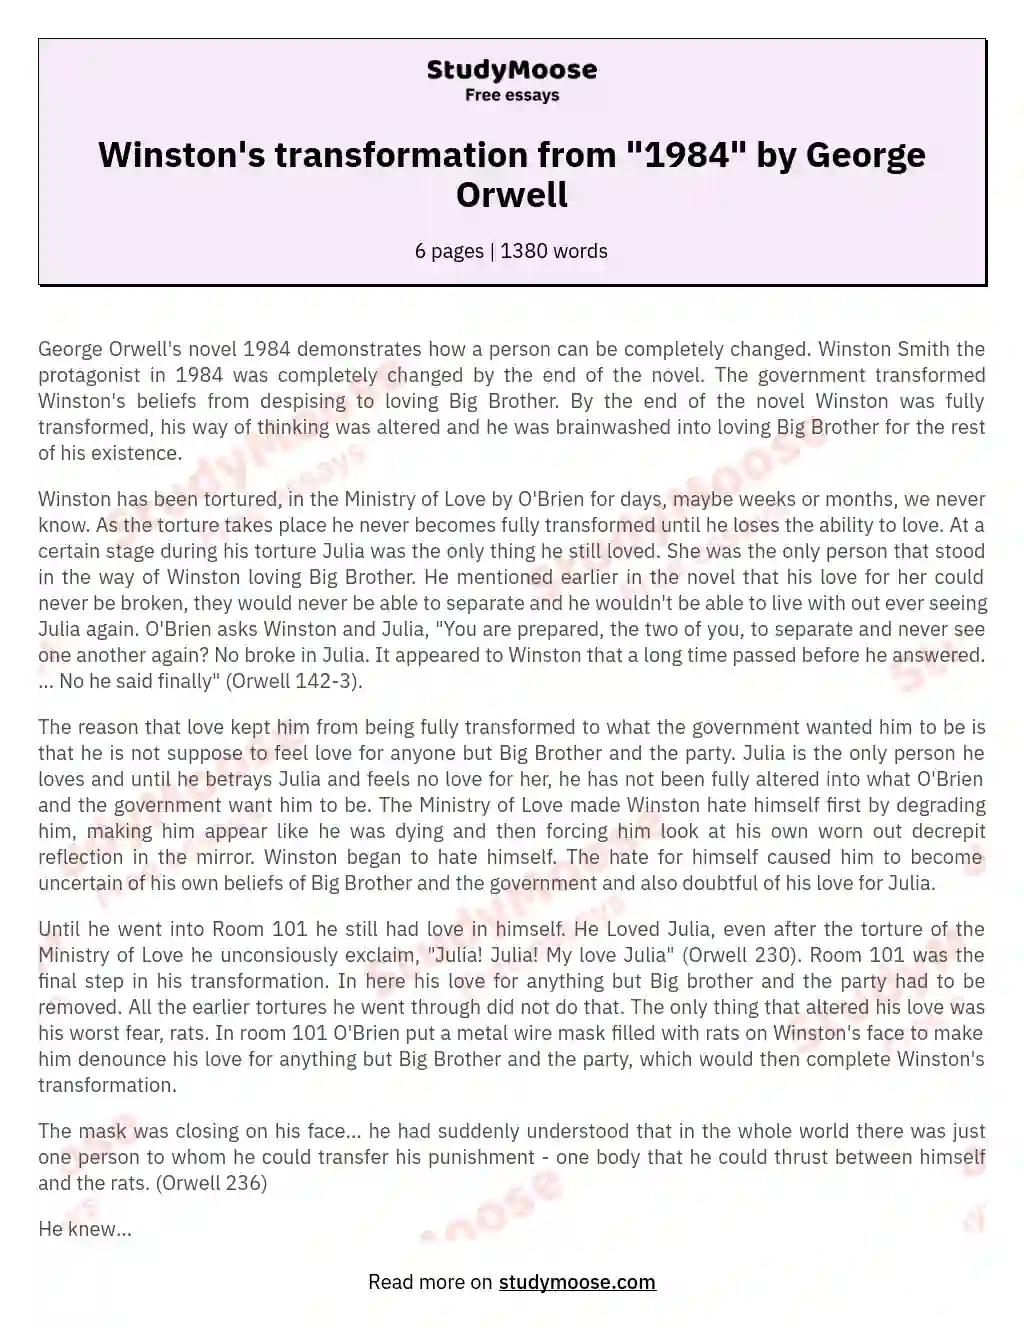 Winston's transformation from "1984" by George Orwell